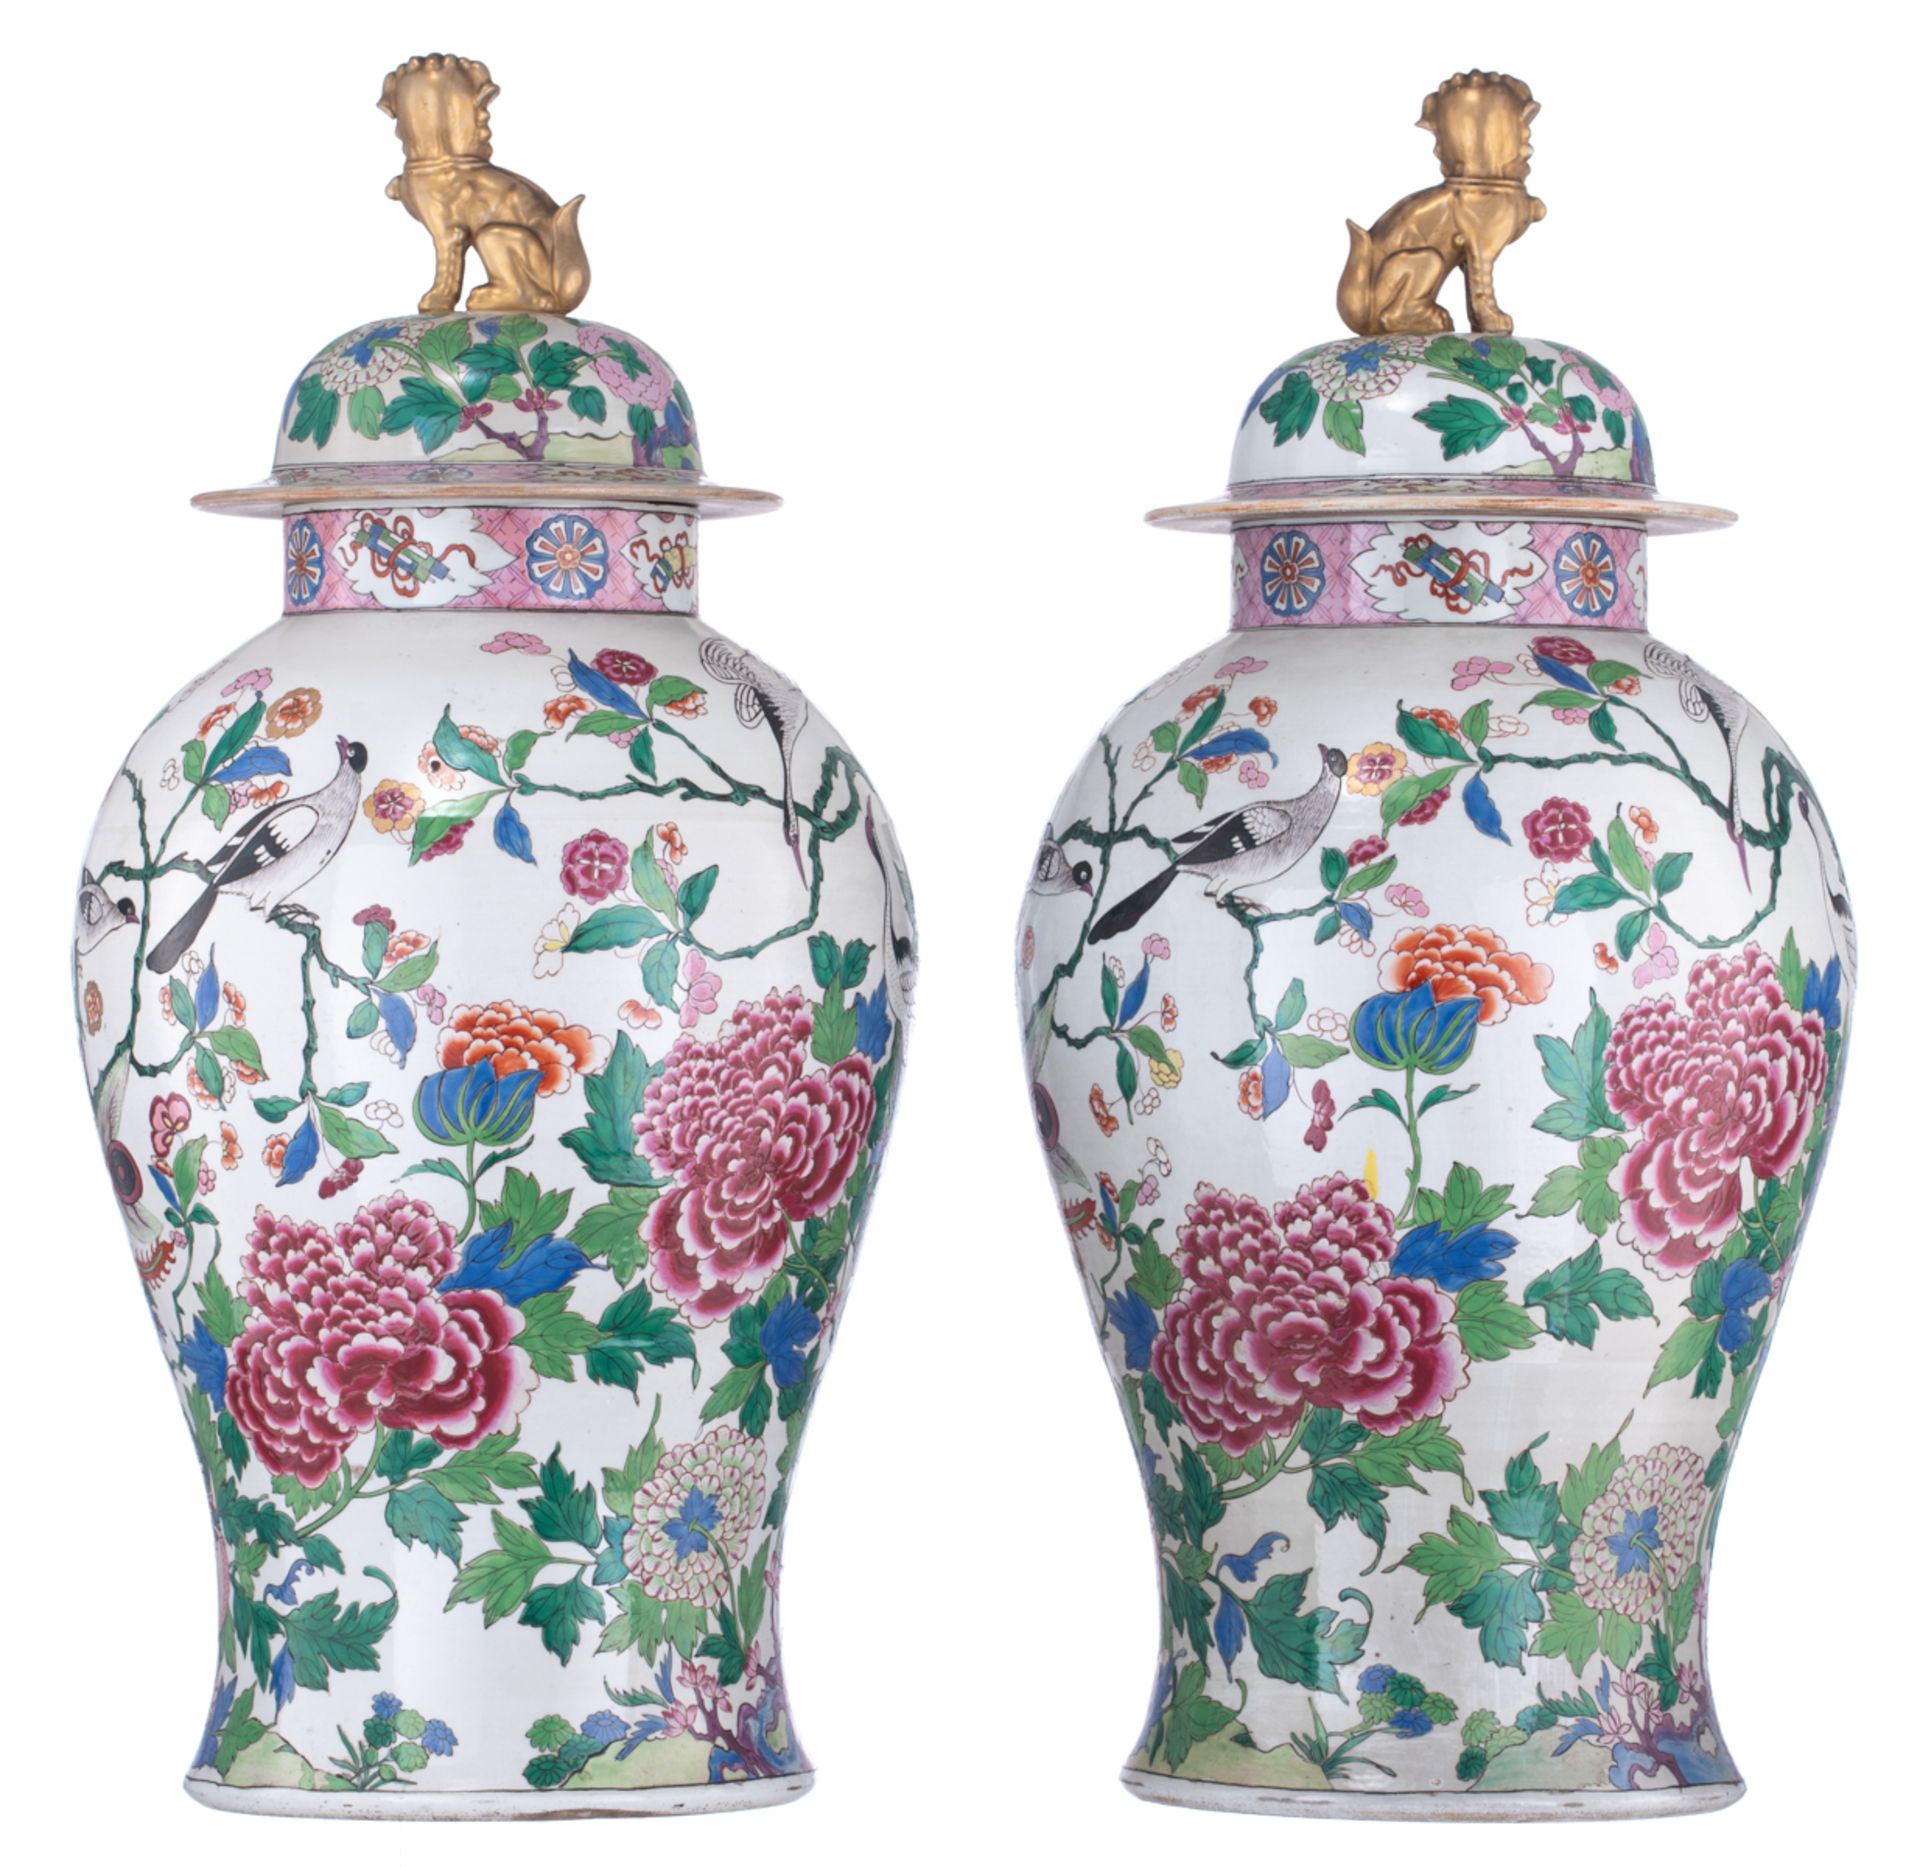 A large pair of covered famille rose Samson vases, decorated with birds and griffons in a floral set - Image 3 of 8